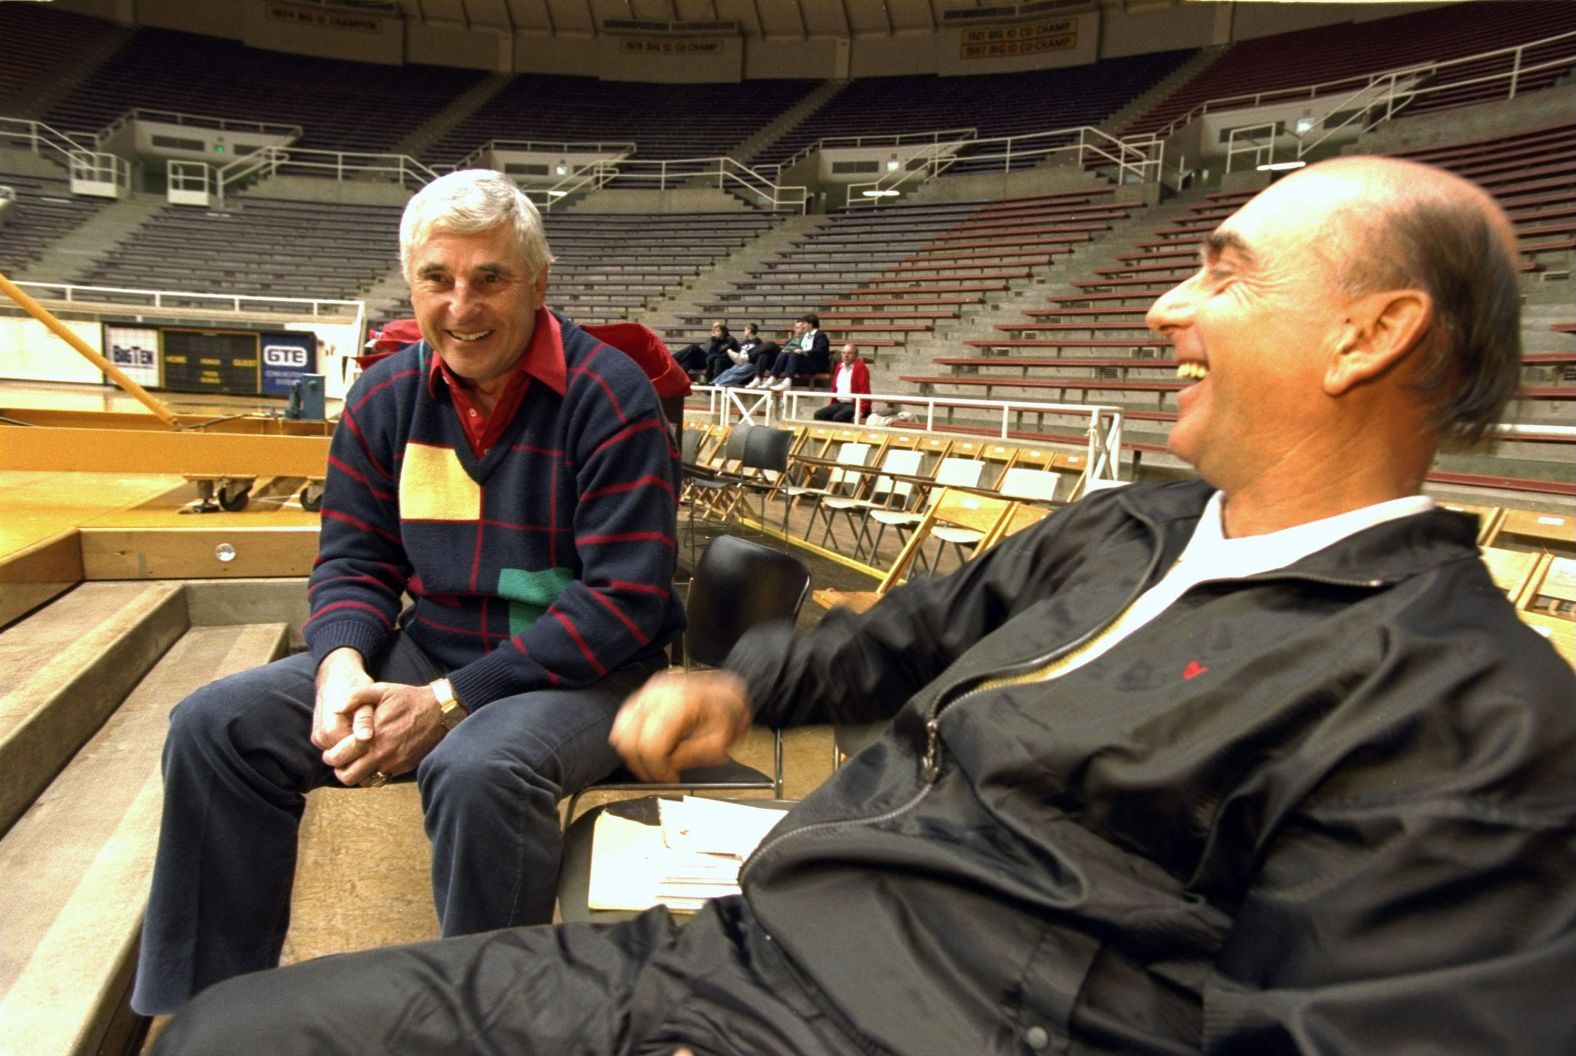 Knight speaks with ESPN announcer Dick Vitale before a game in 1994.